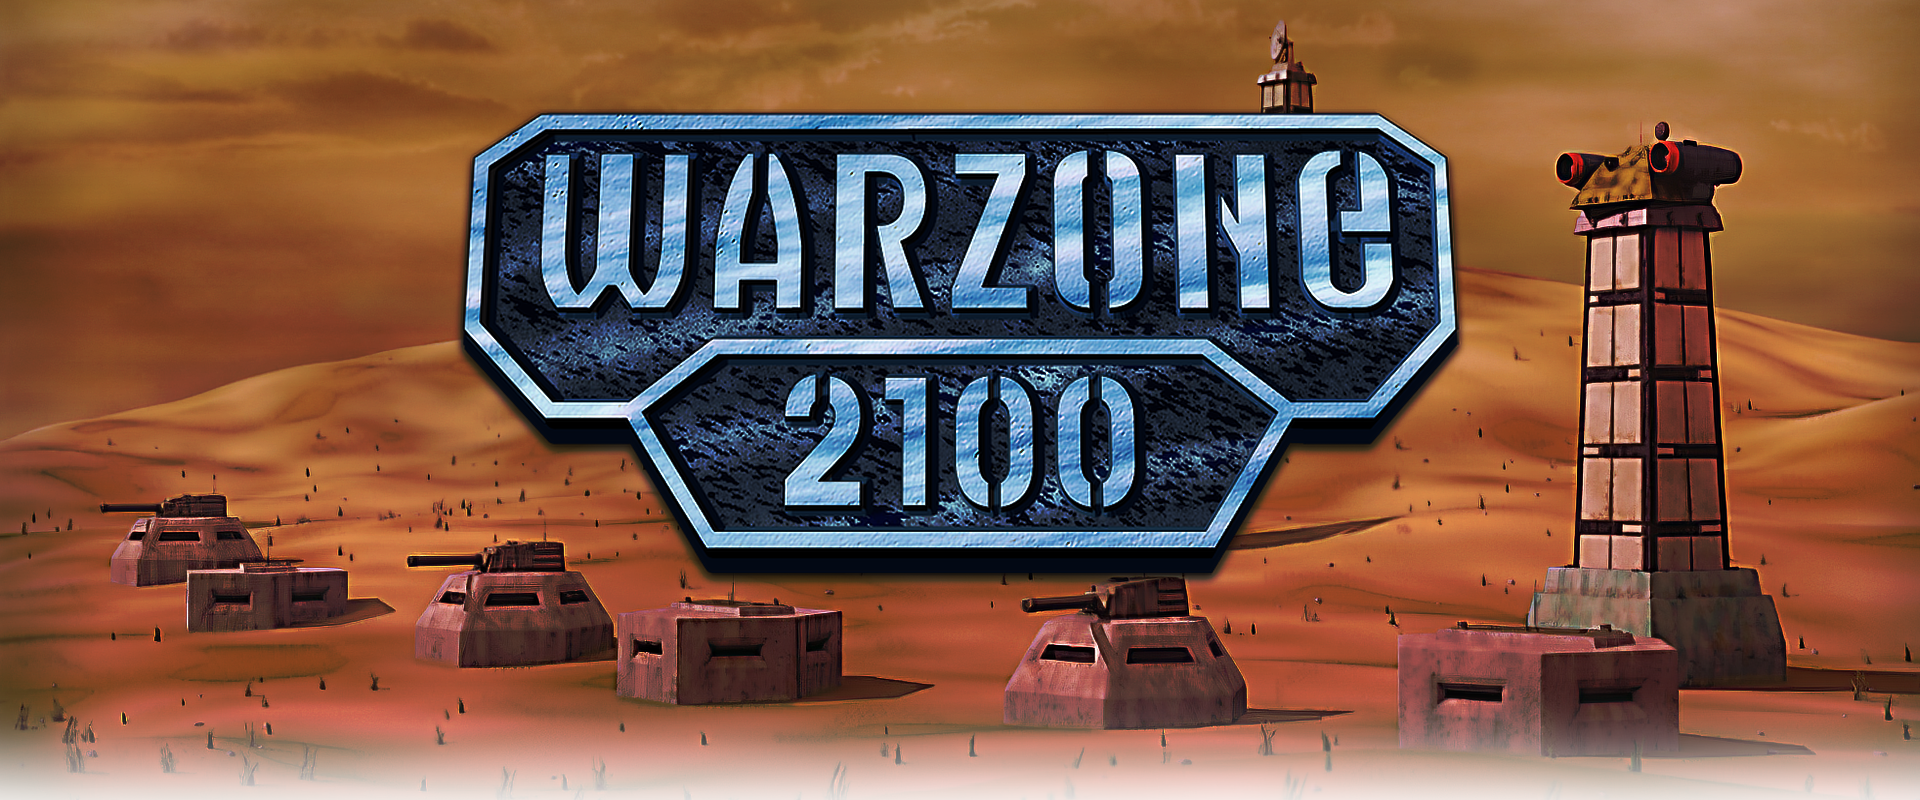 where can i get my download of warzone 2100 for windows 7